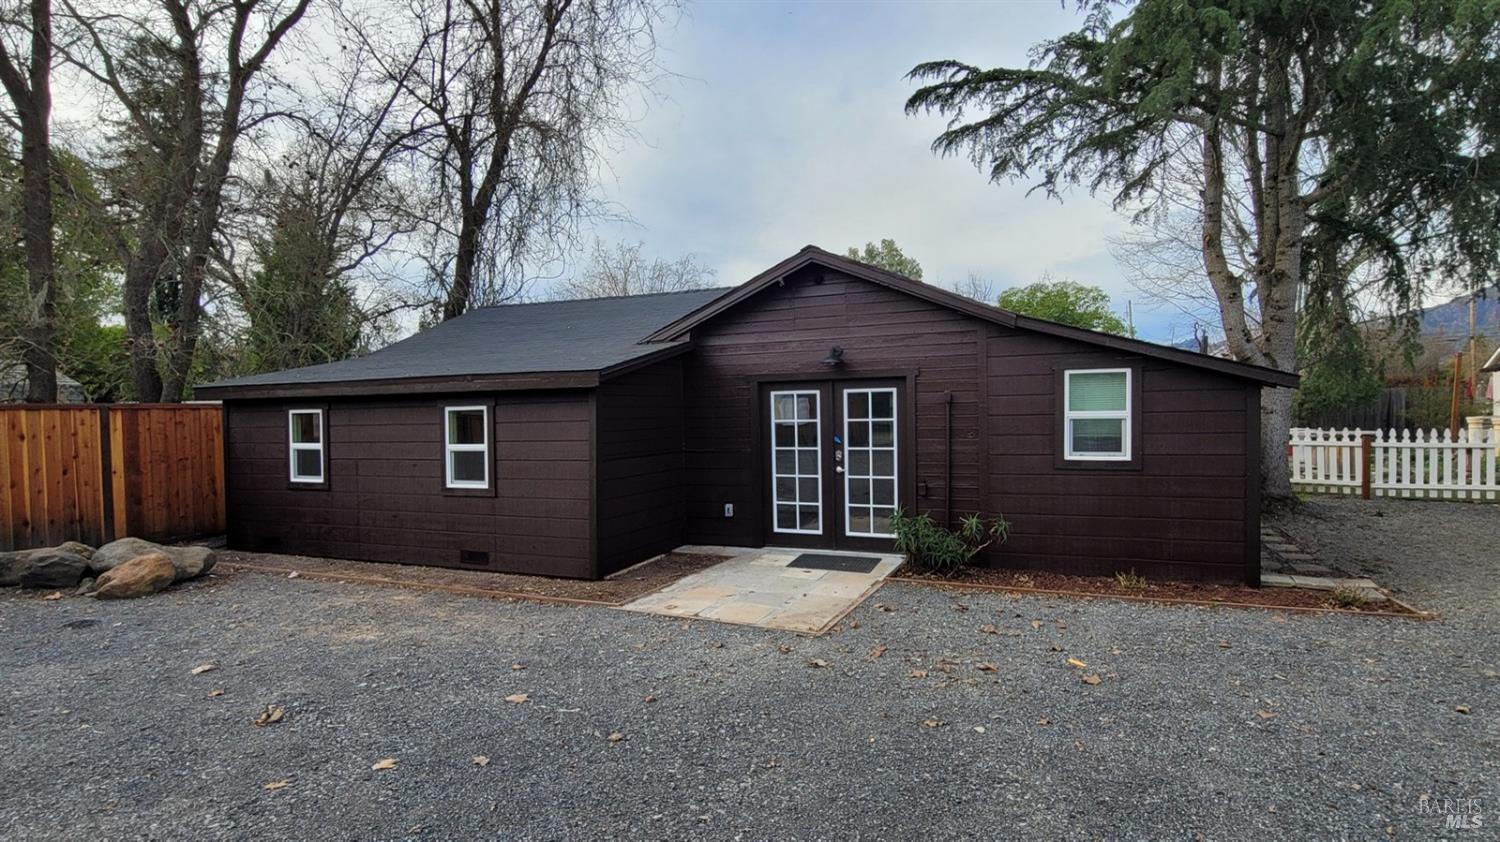 Photo of 9255 Sonoma Hwy in Kenwood, CA